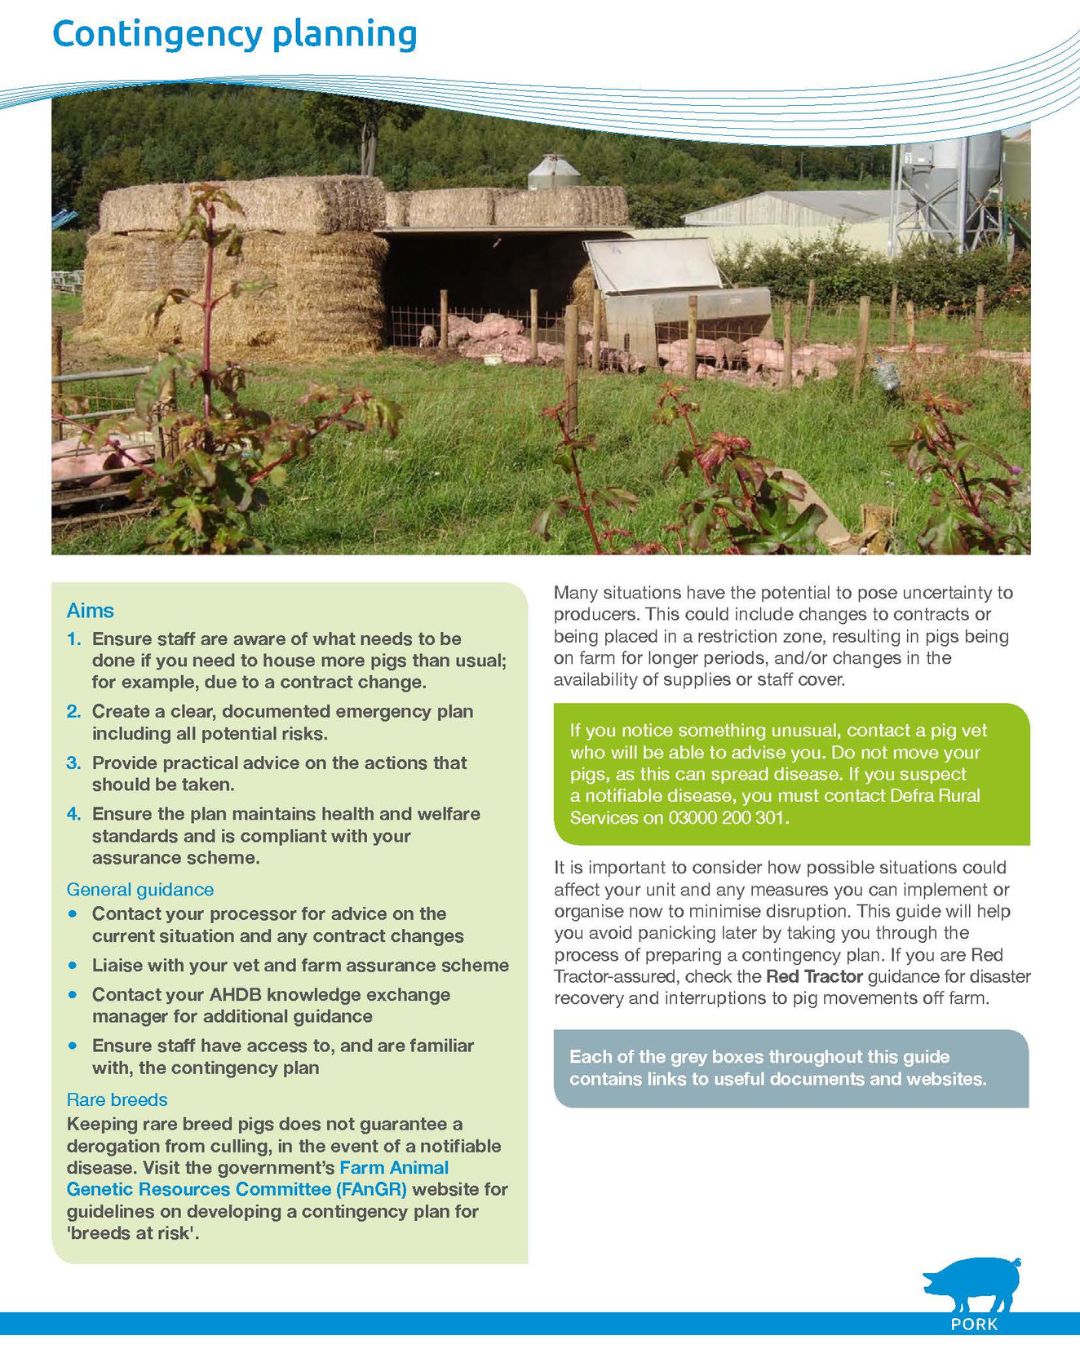 Cover image of contingency planning factsheet